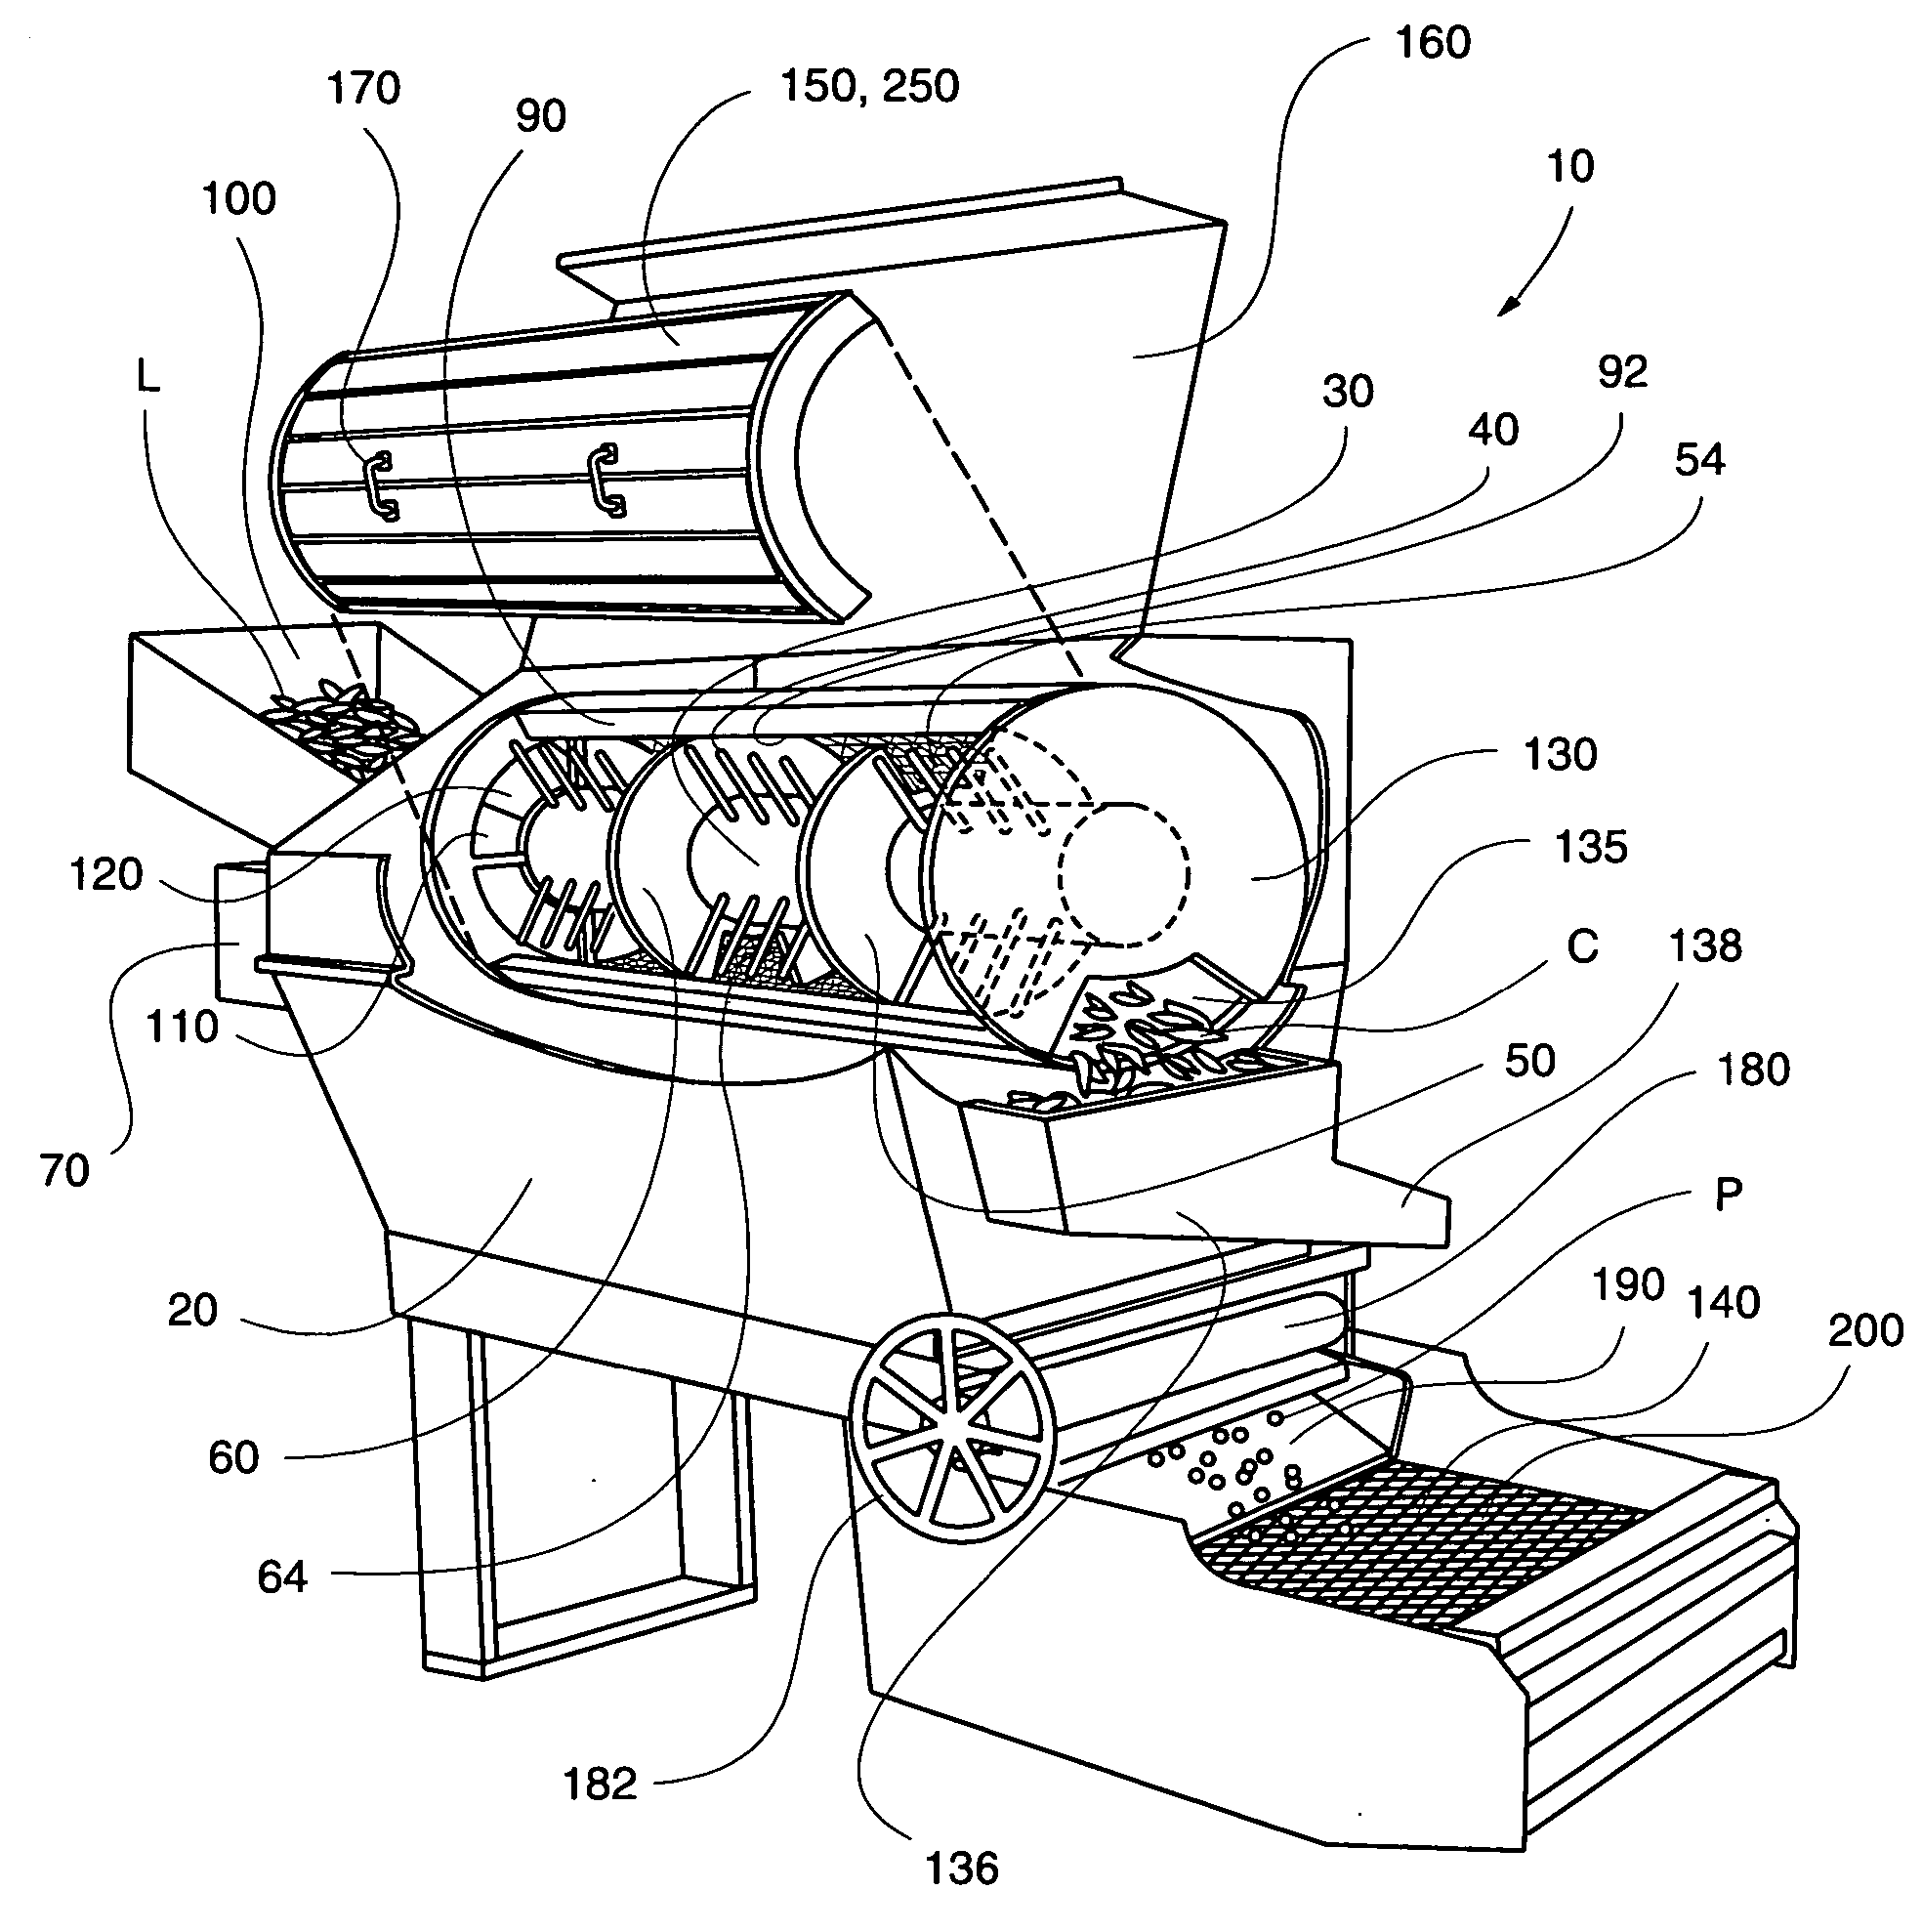 Sheller and method of use thereof